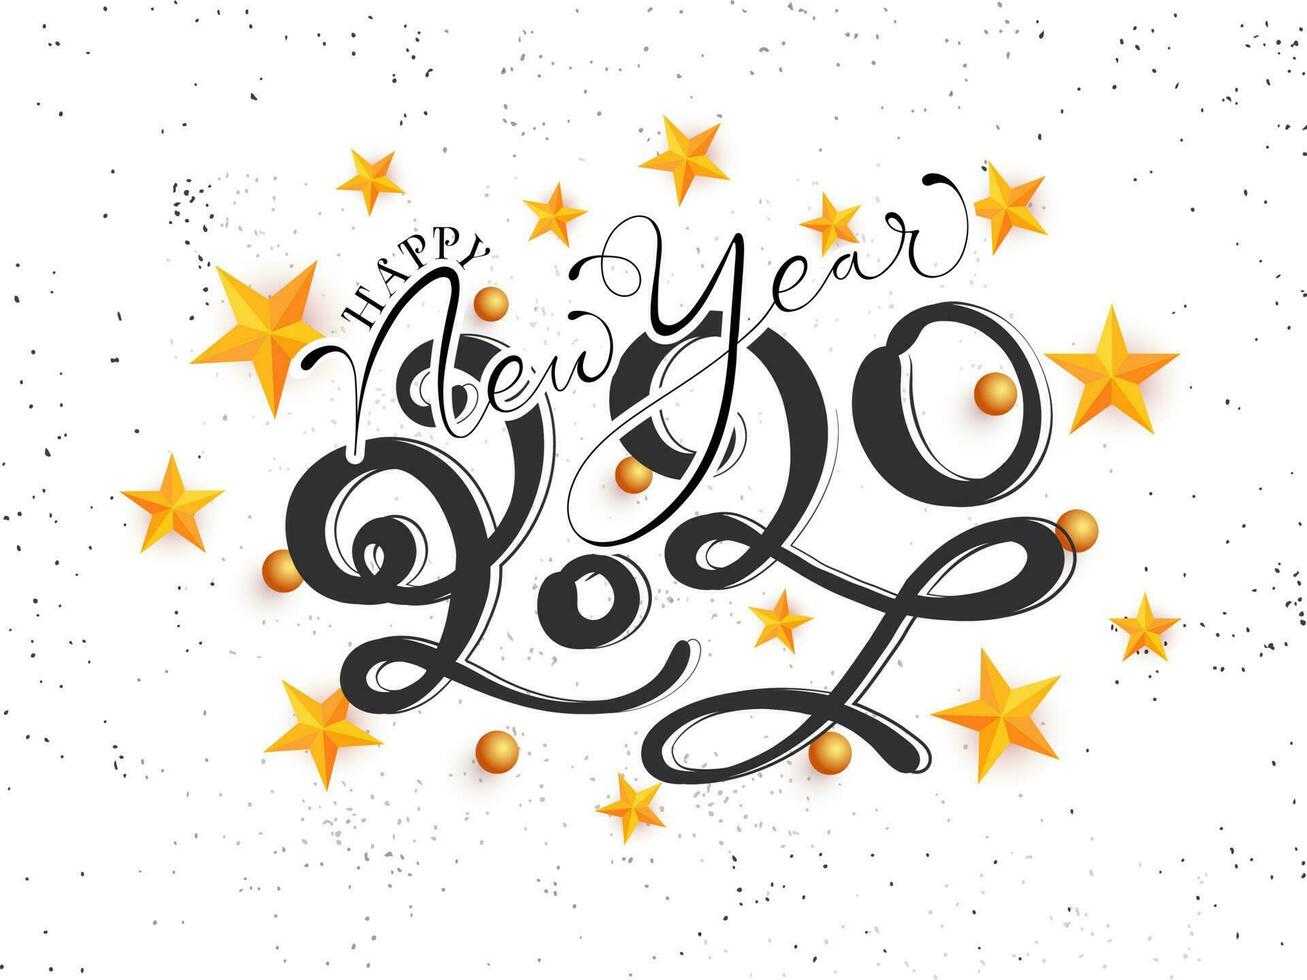 Happy New Year 2020 Text Decorated with 3D Golden Stars, Spheres and Black Confetti on White Background. vector